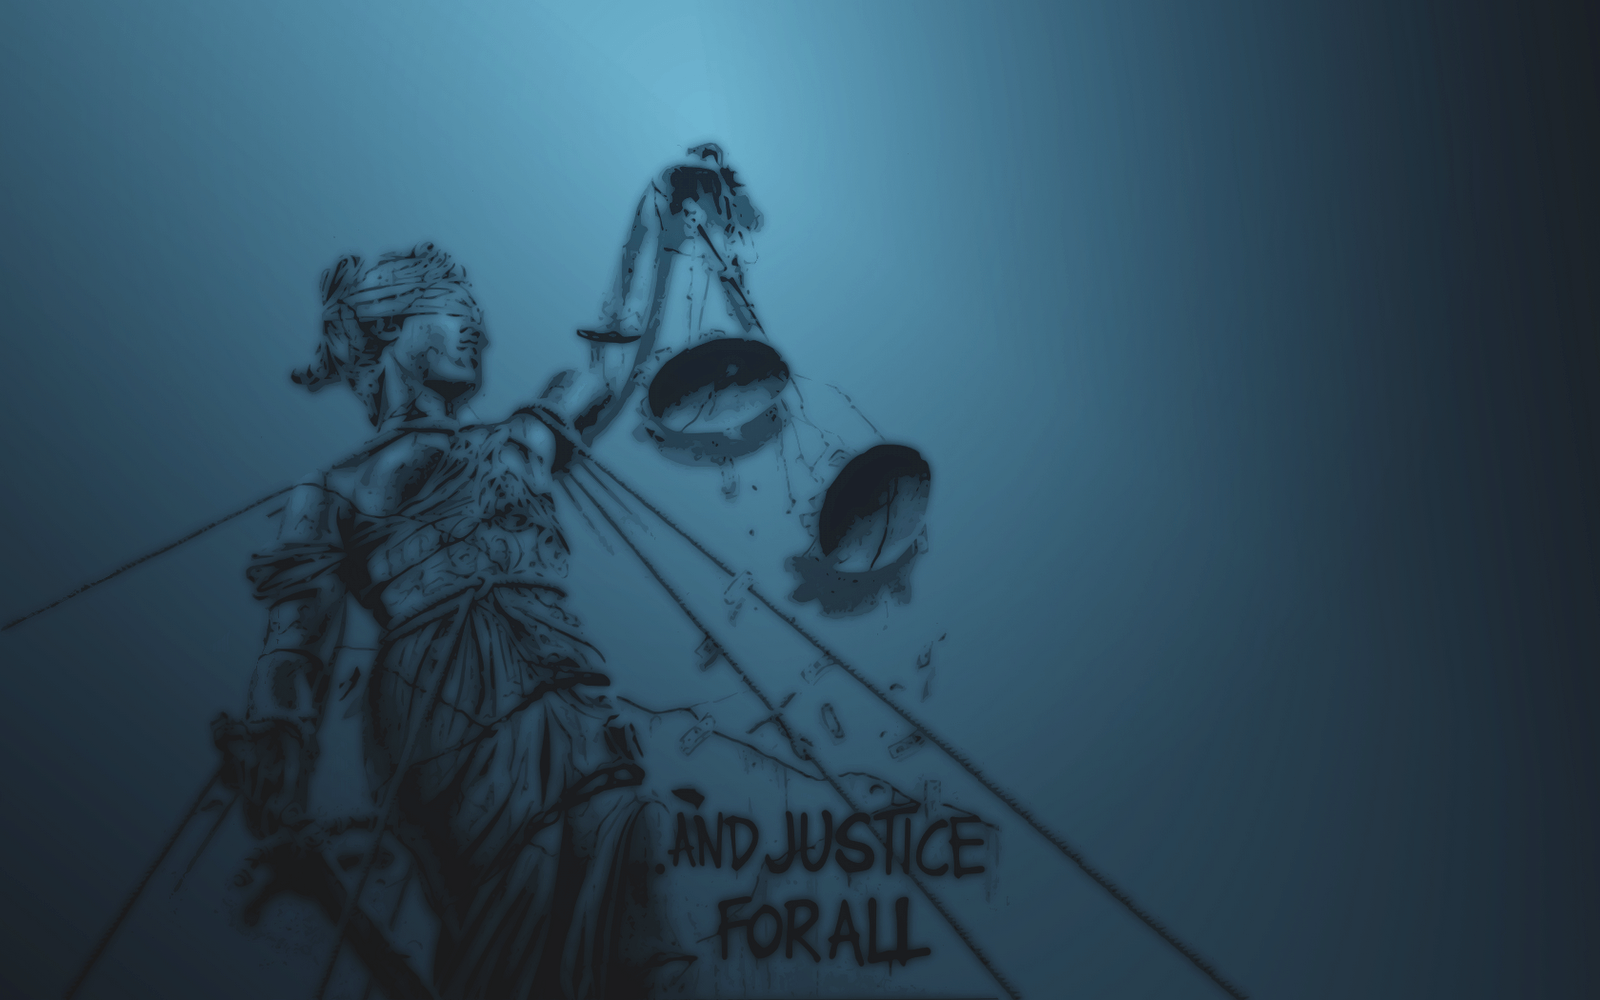 Metallica And Justice For All Wallpaper HD Resolution For Desktop